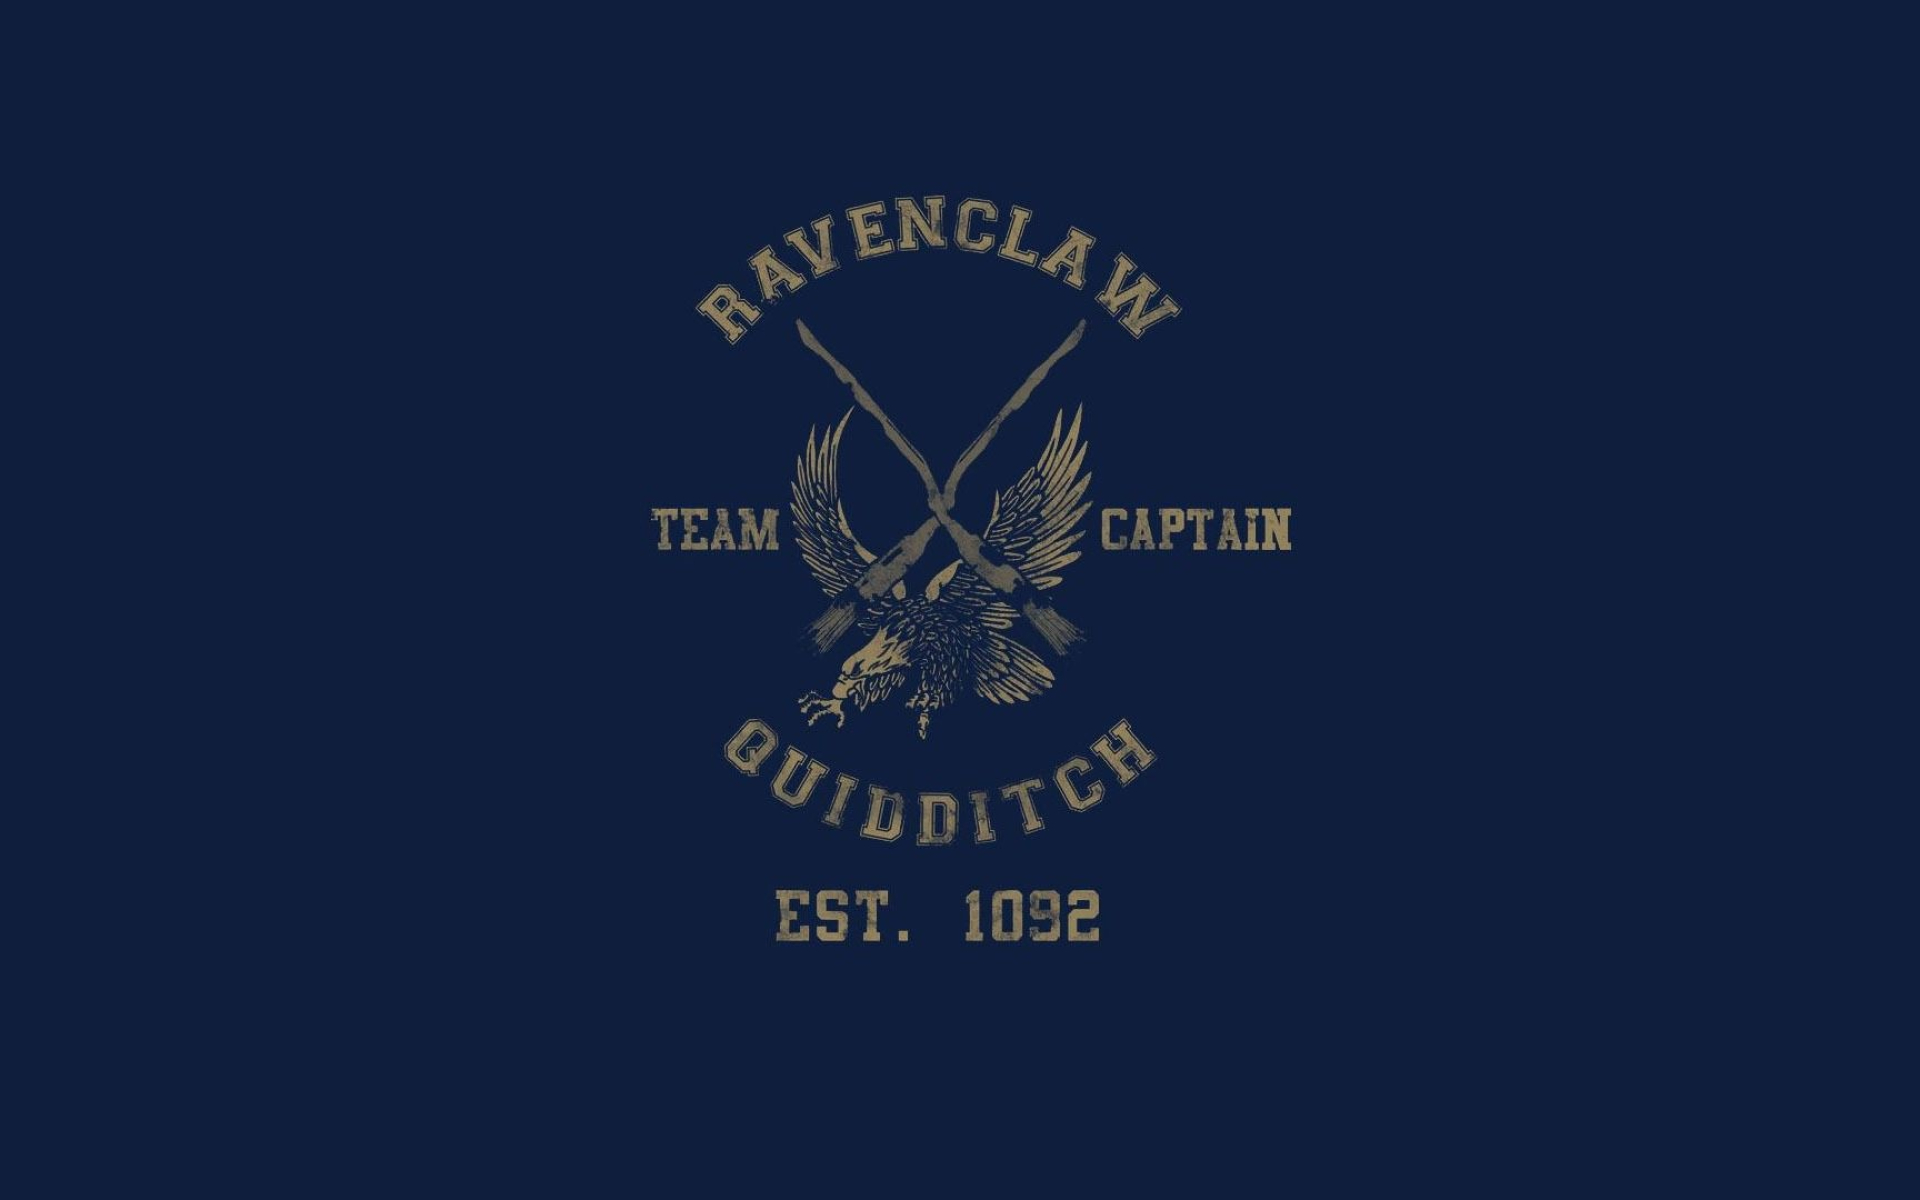 Quidditch wallpapers, Magical sport, Exciting moments, Thrilling gameplay, 1920x1200 HD Desktop